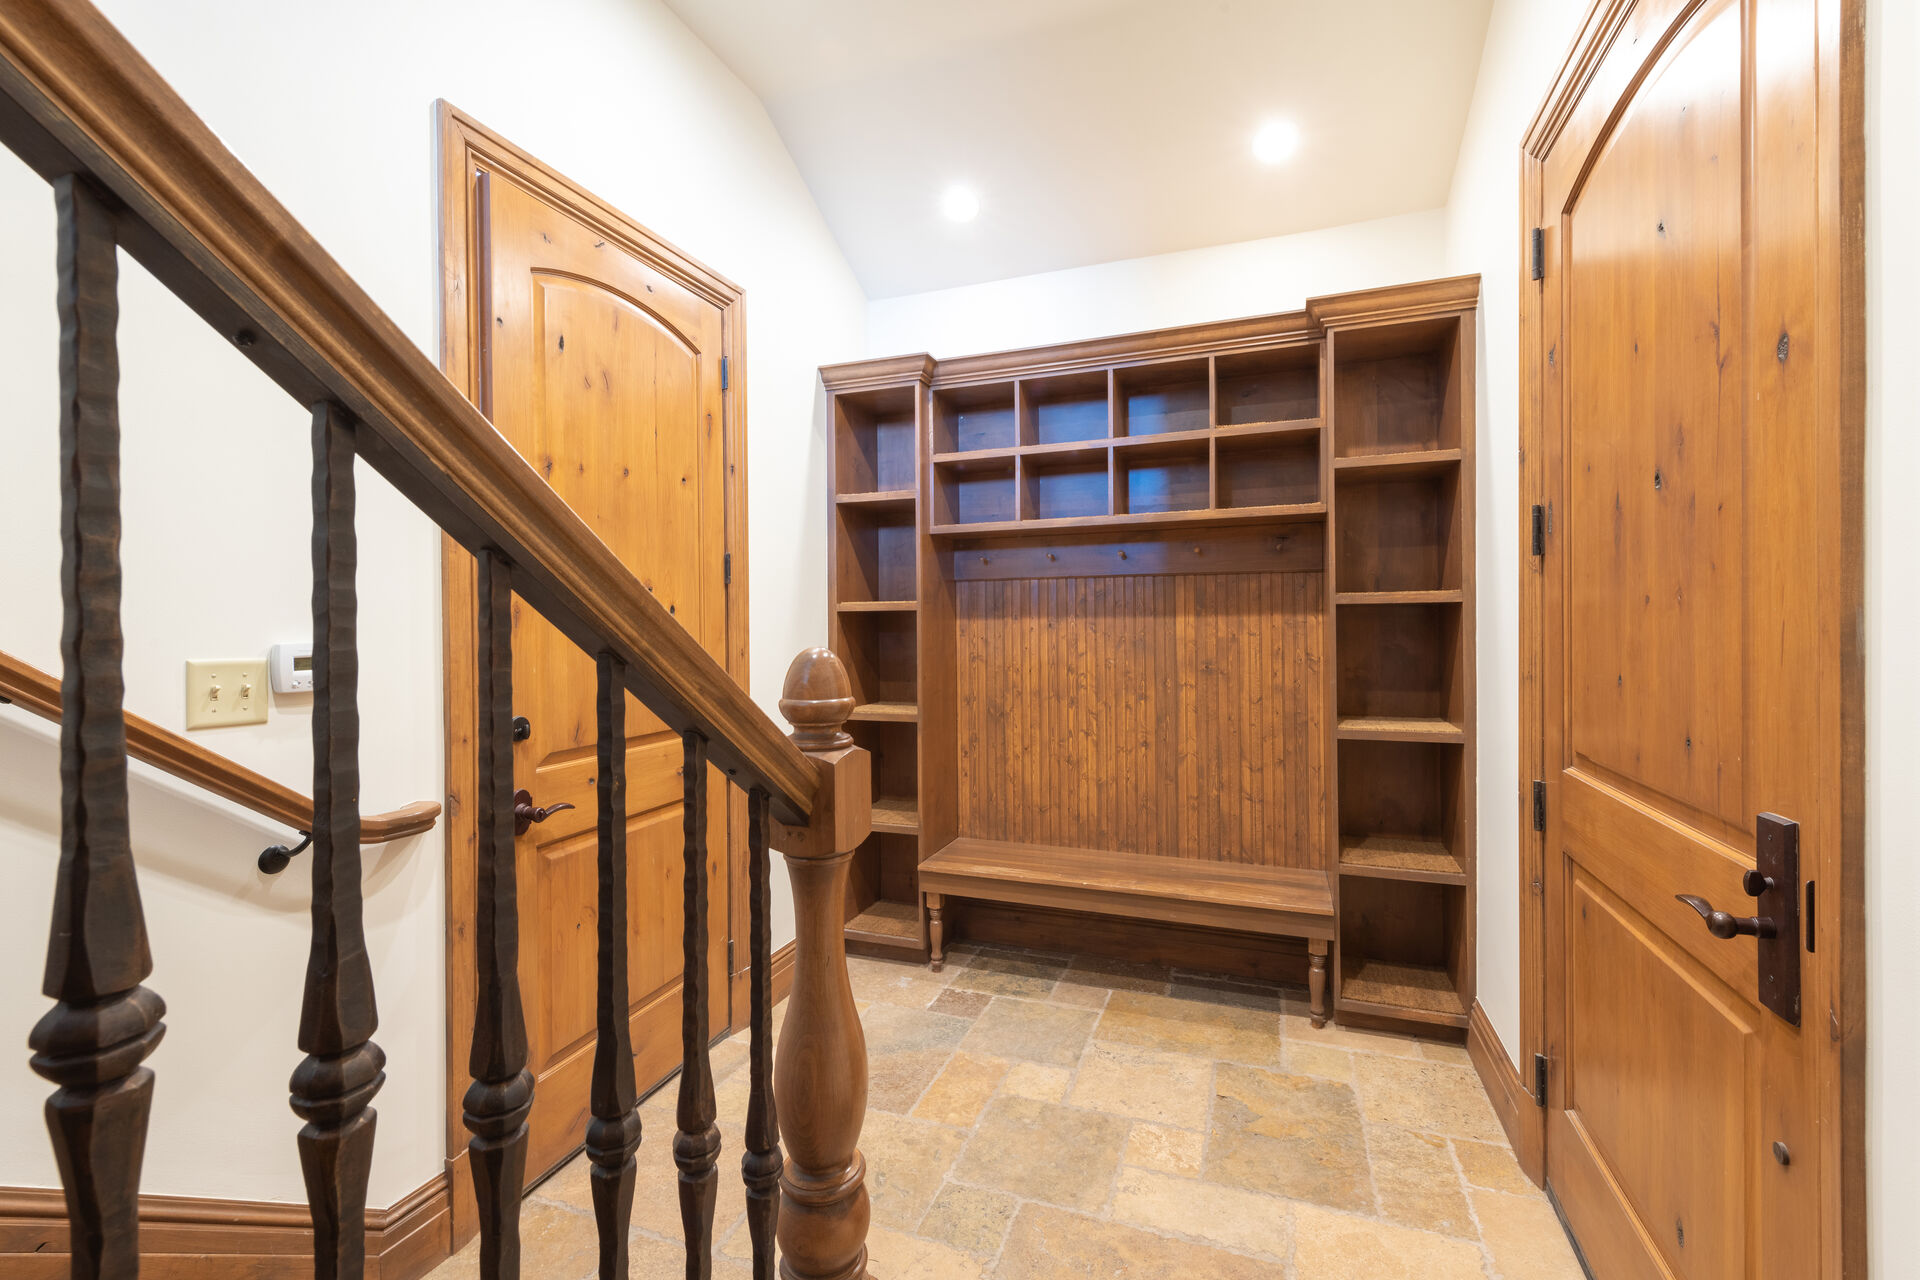 Spacious entry mudroom with cubbies to store gear